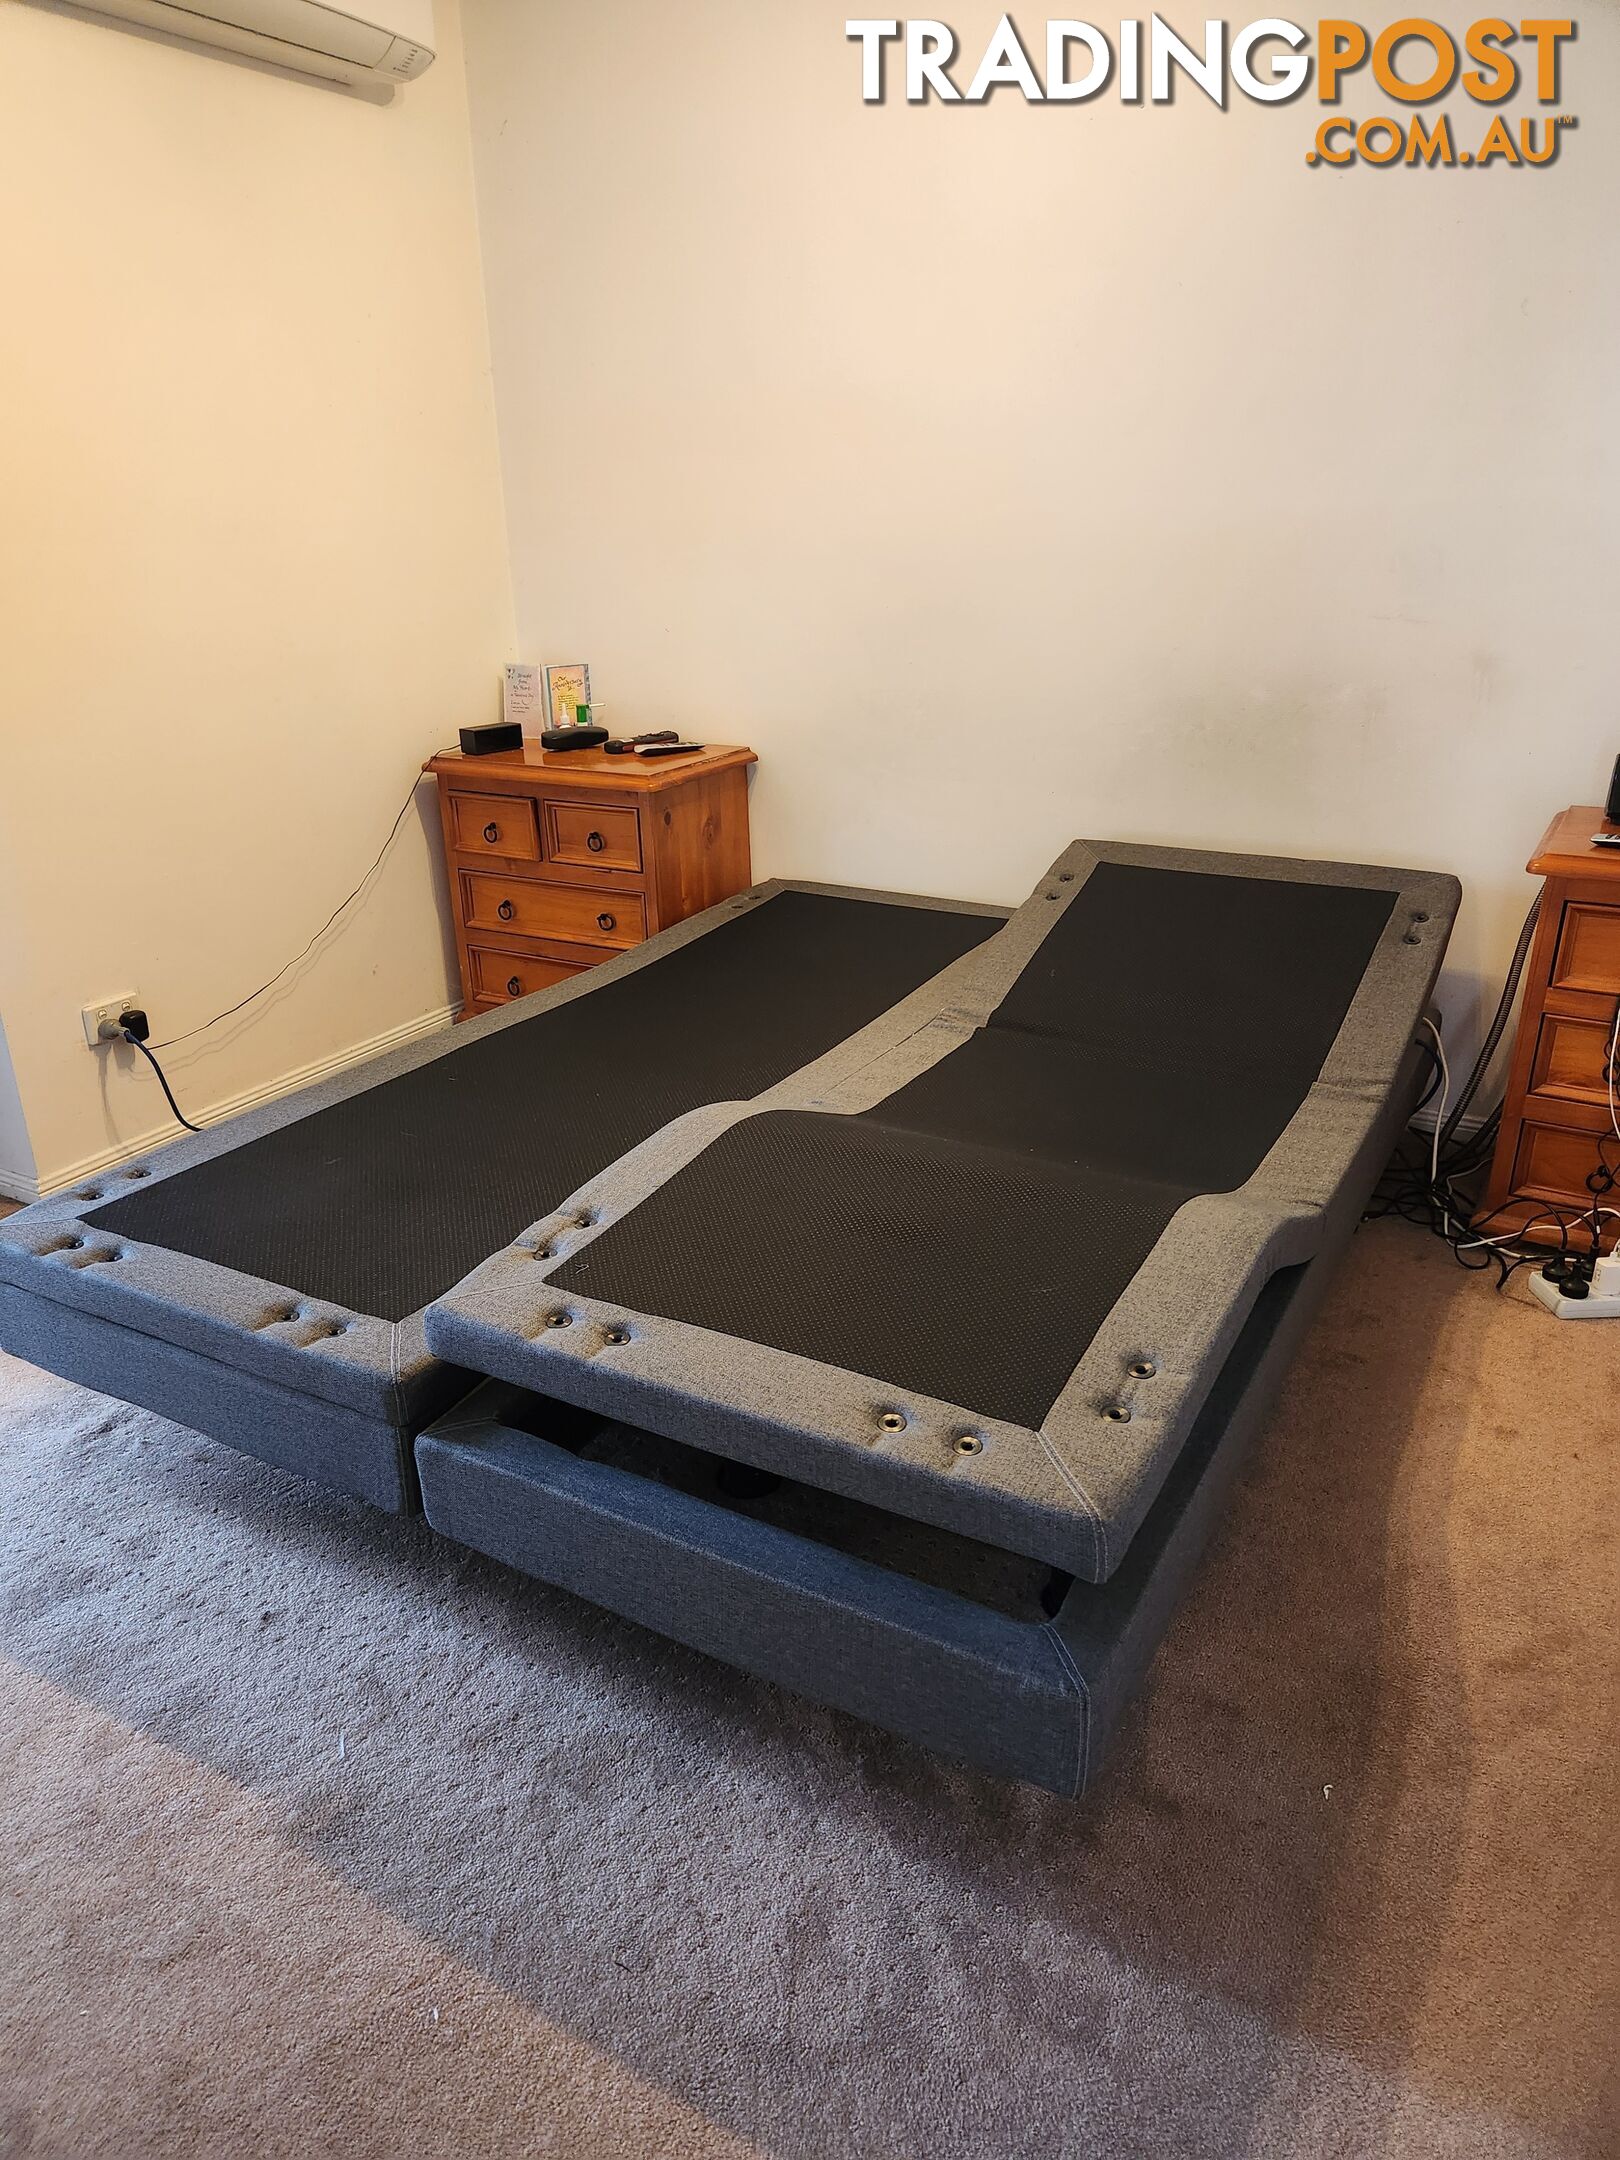 Adjustable electronic massage queen bed - as new